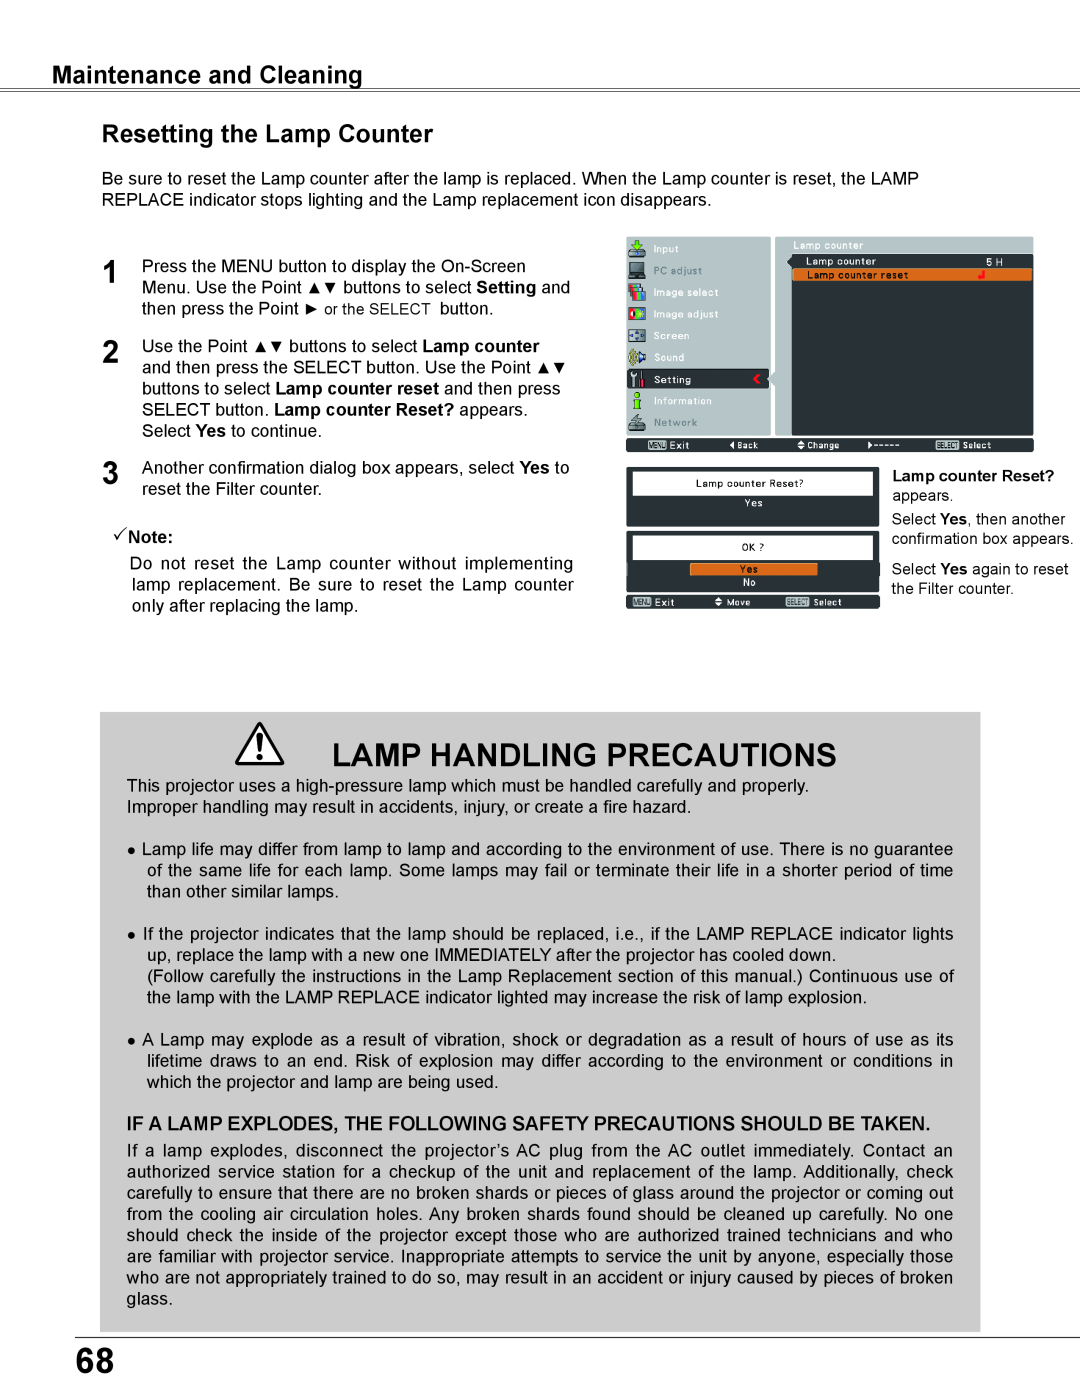 Sanyo WXU700A owner manual Lamp Handling Precautions, Resetting the Lamp Counter, Maintenance and Cleaning, Note 